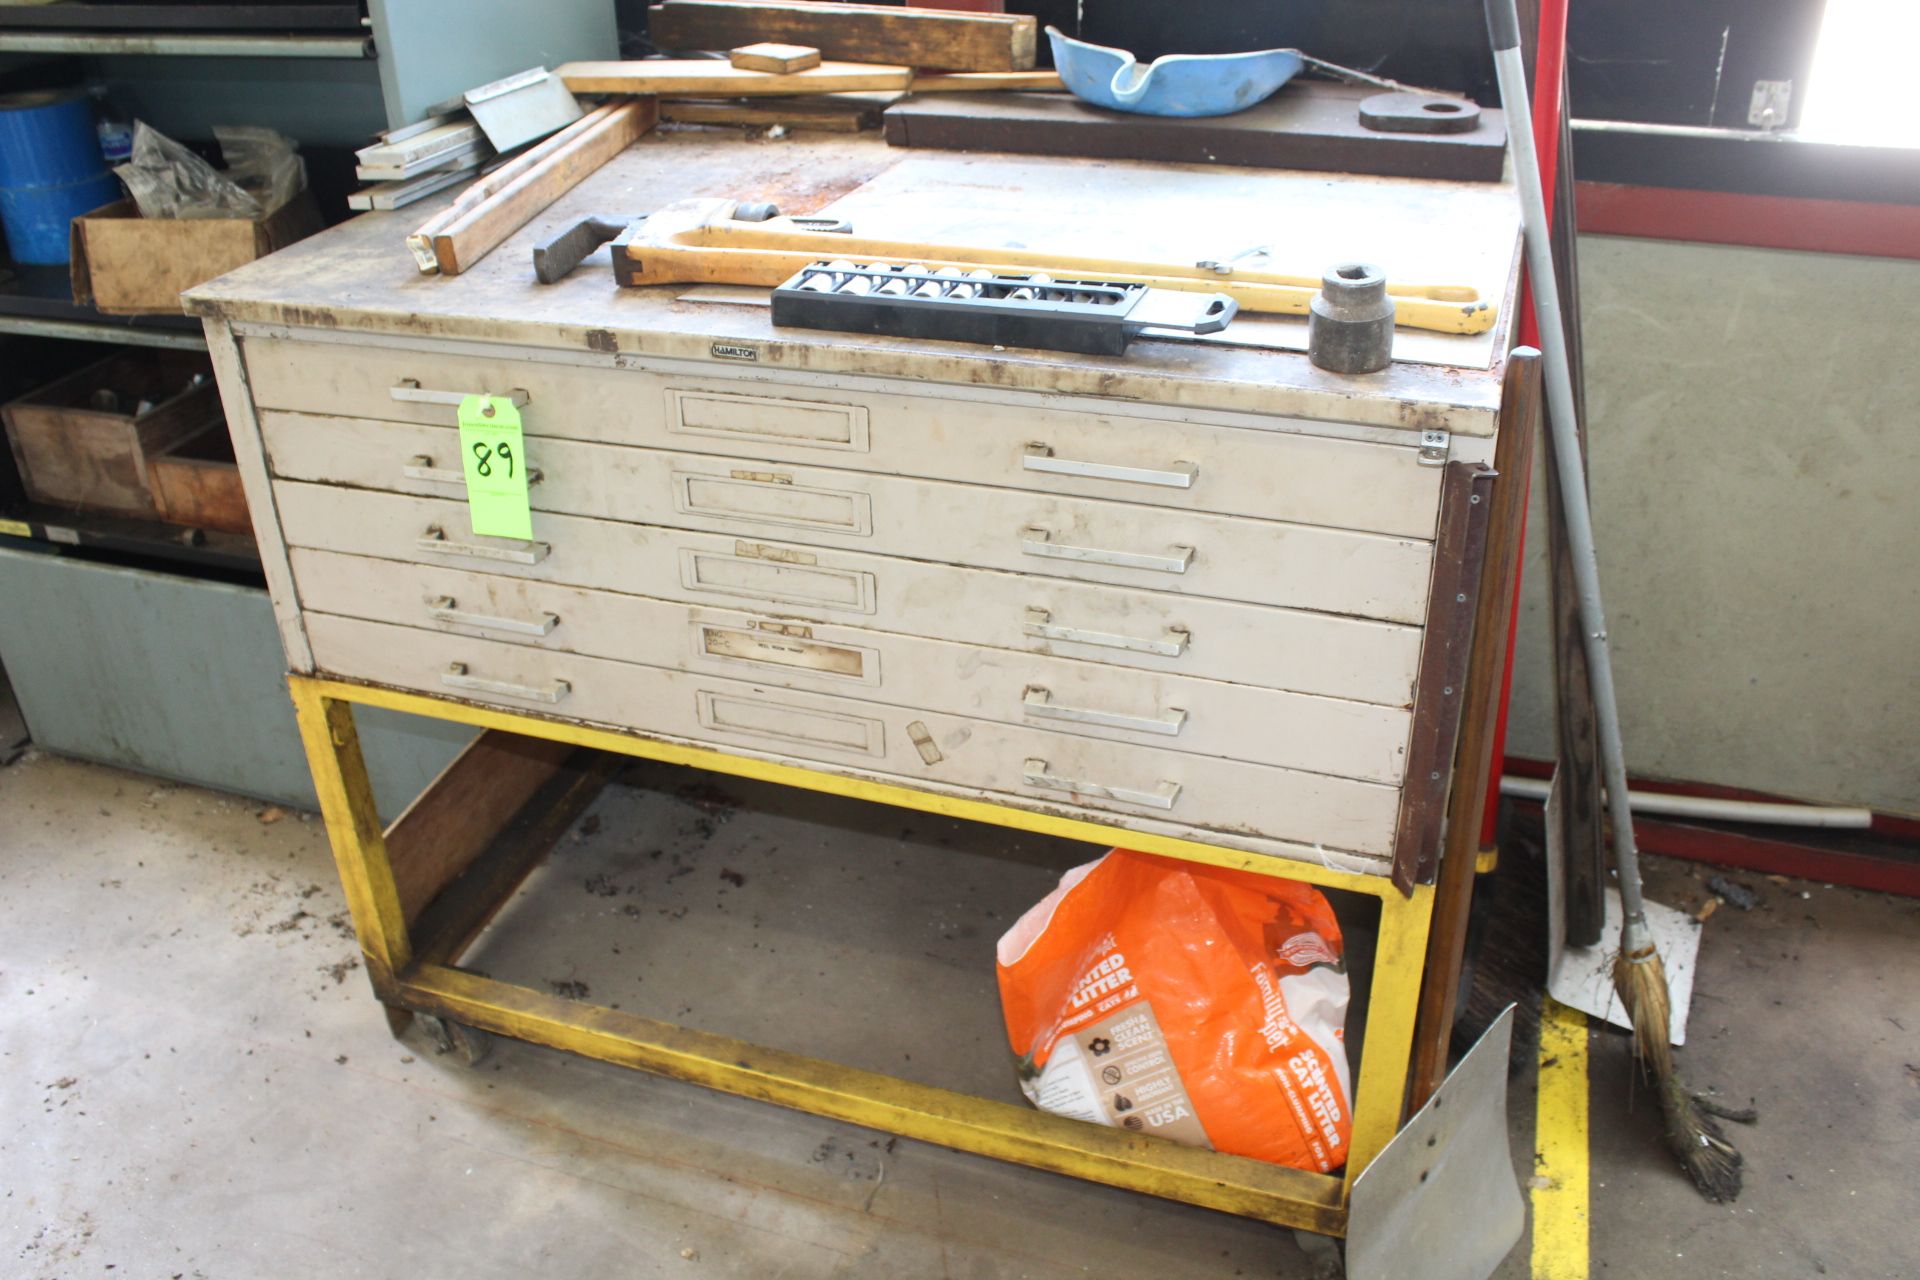 Hamilton 5-Drawer Flat File with Contents as Shown